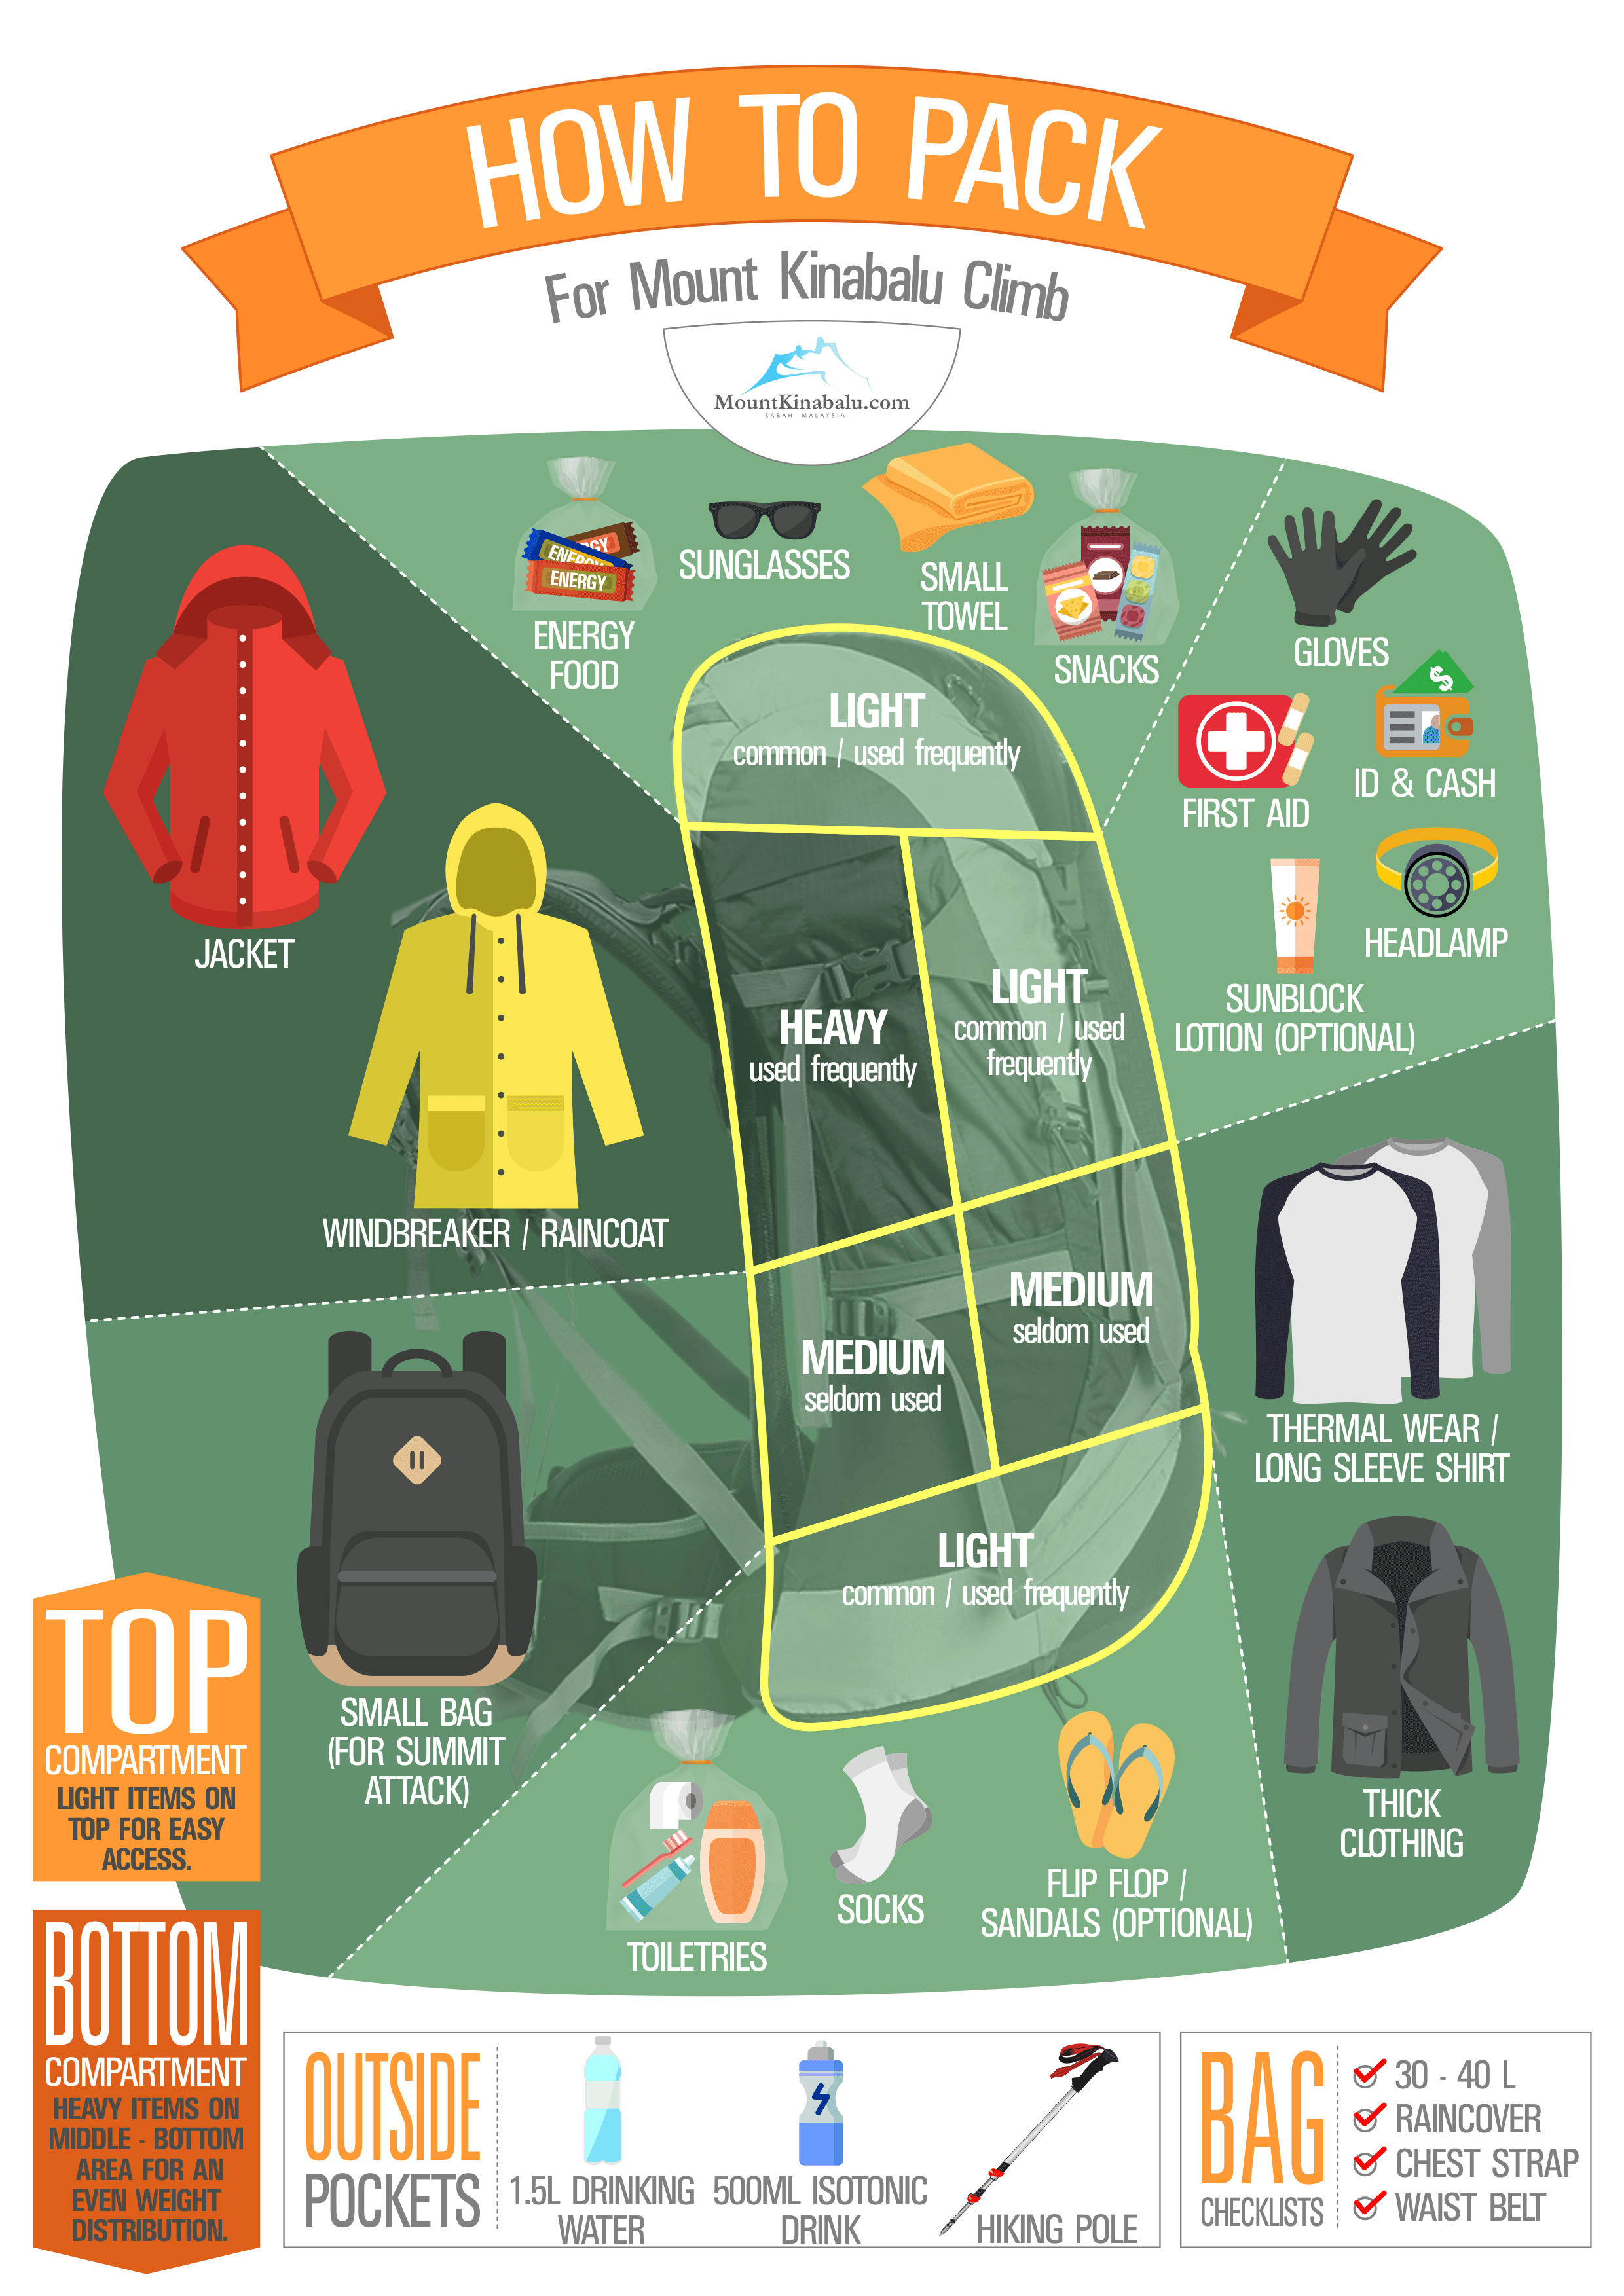 How to Pack for Mount Kinabalu Climb